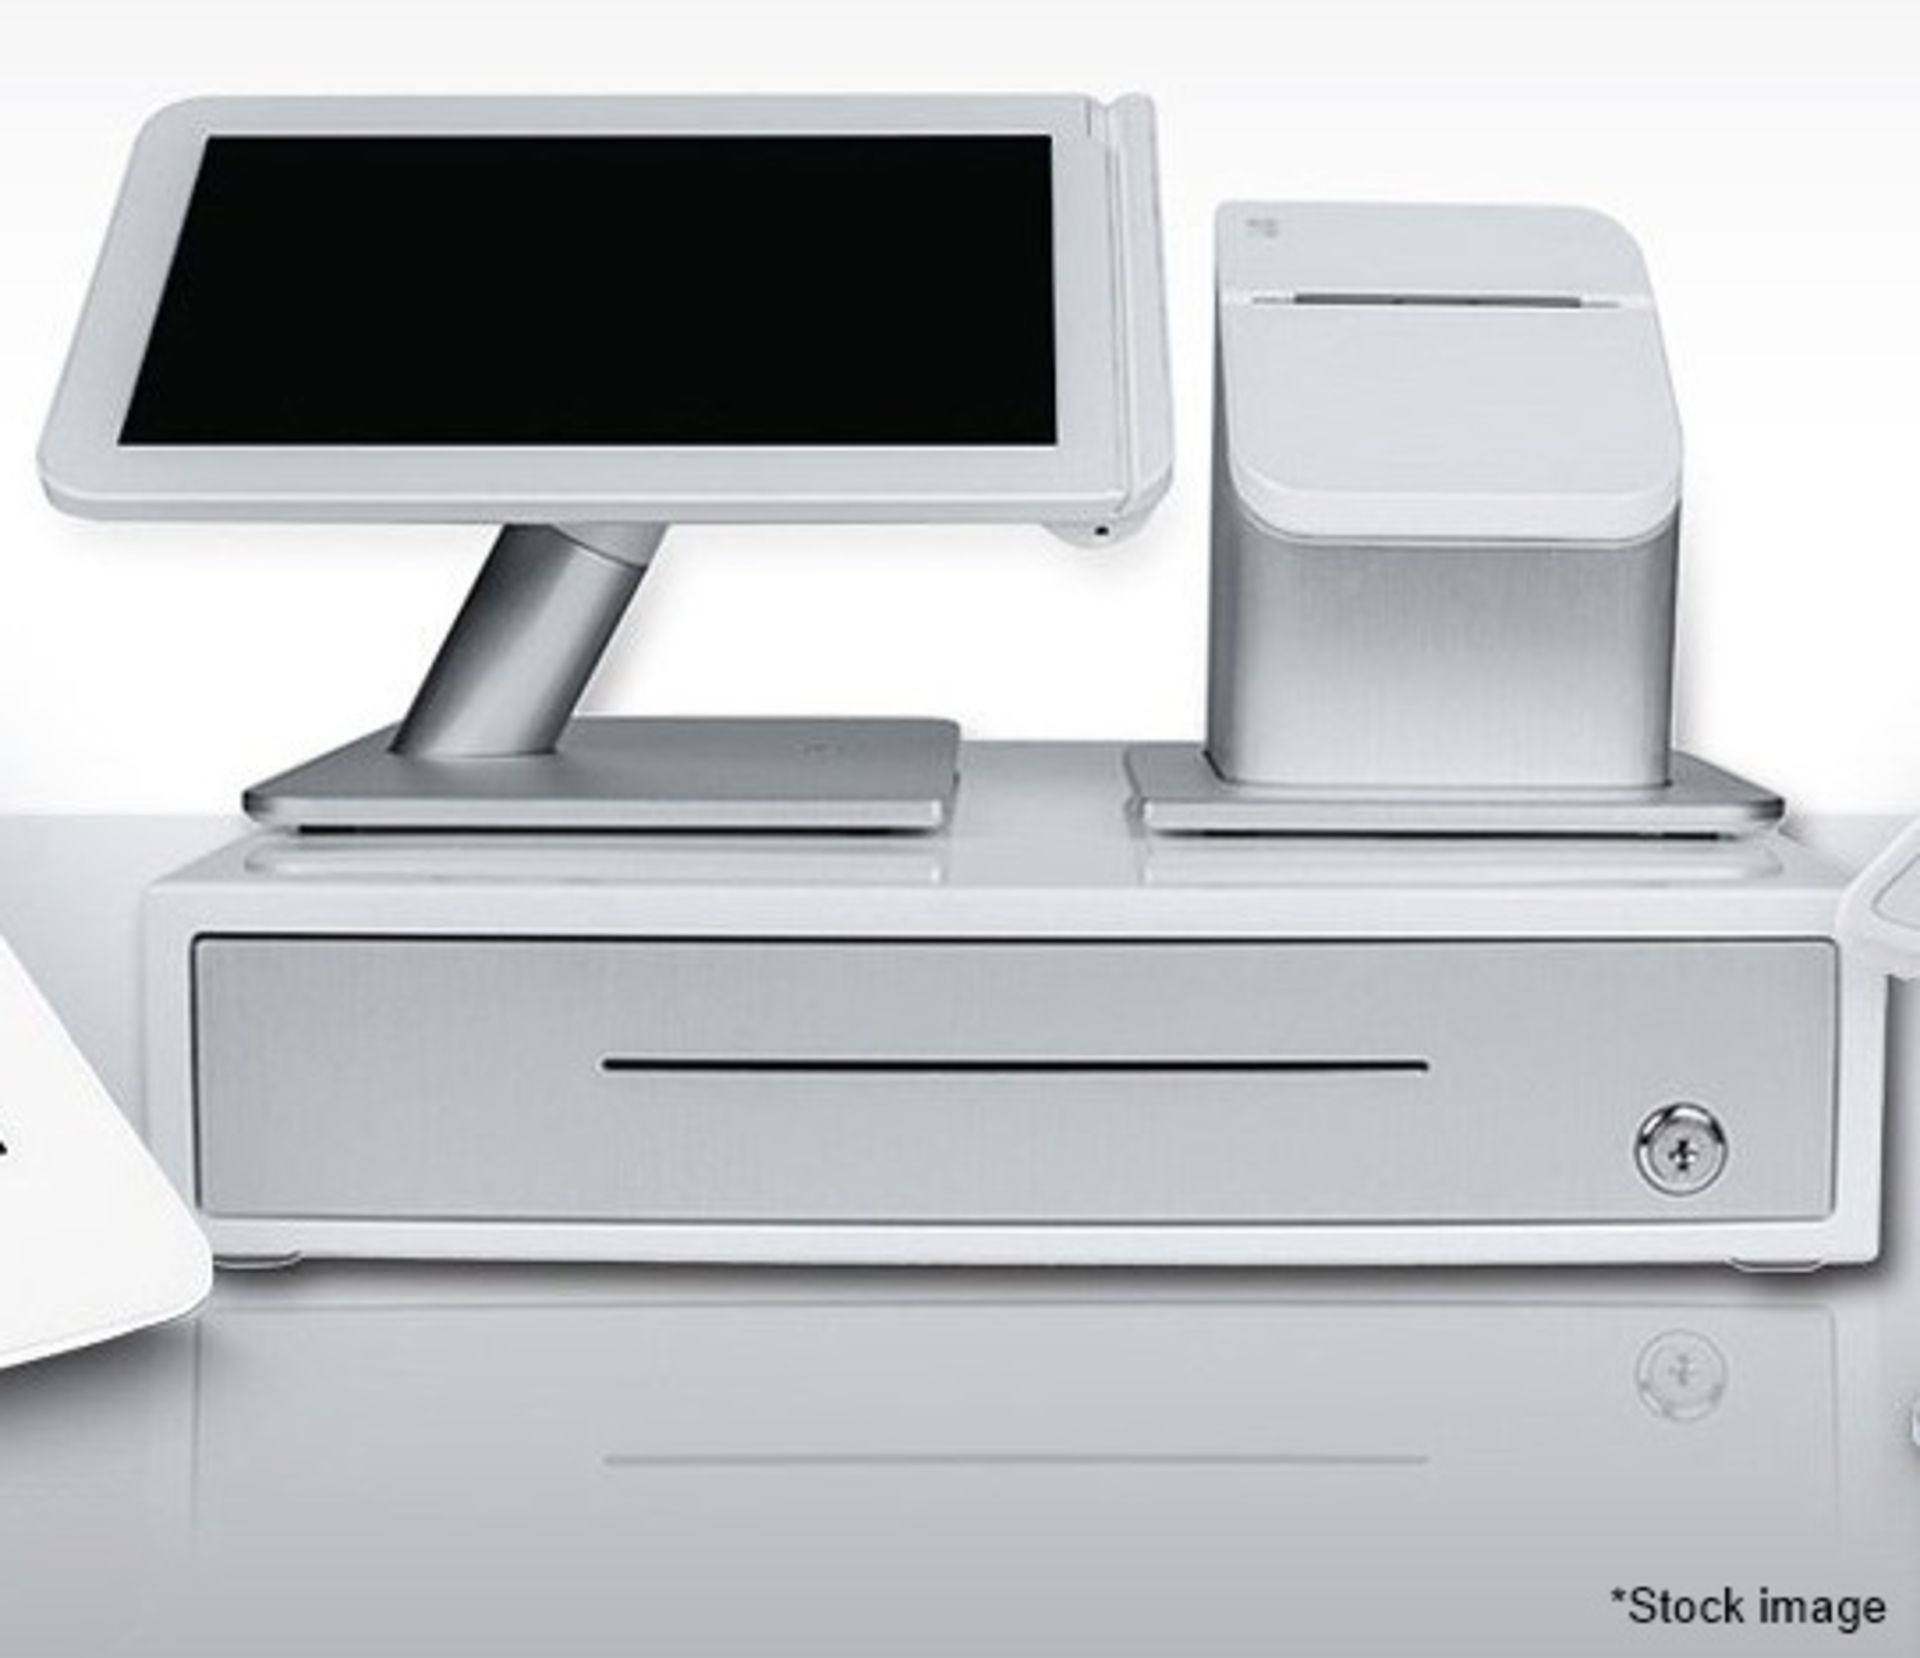 1 x CLOVER Station POS System Including a 11.6" Touch Screen Terminal, Receipt Printer & Cash Drawer